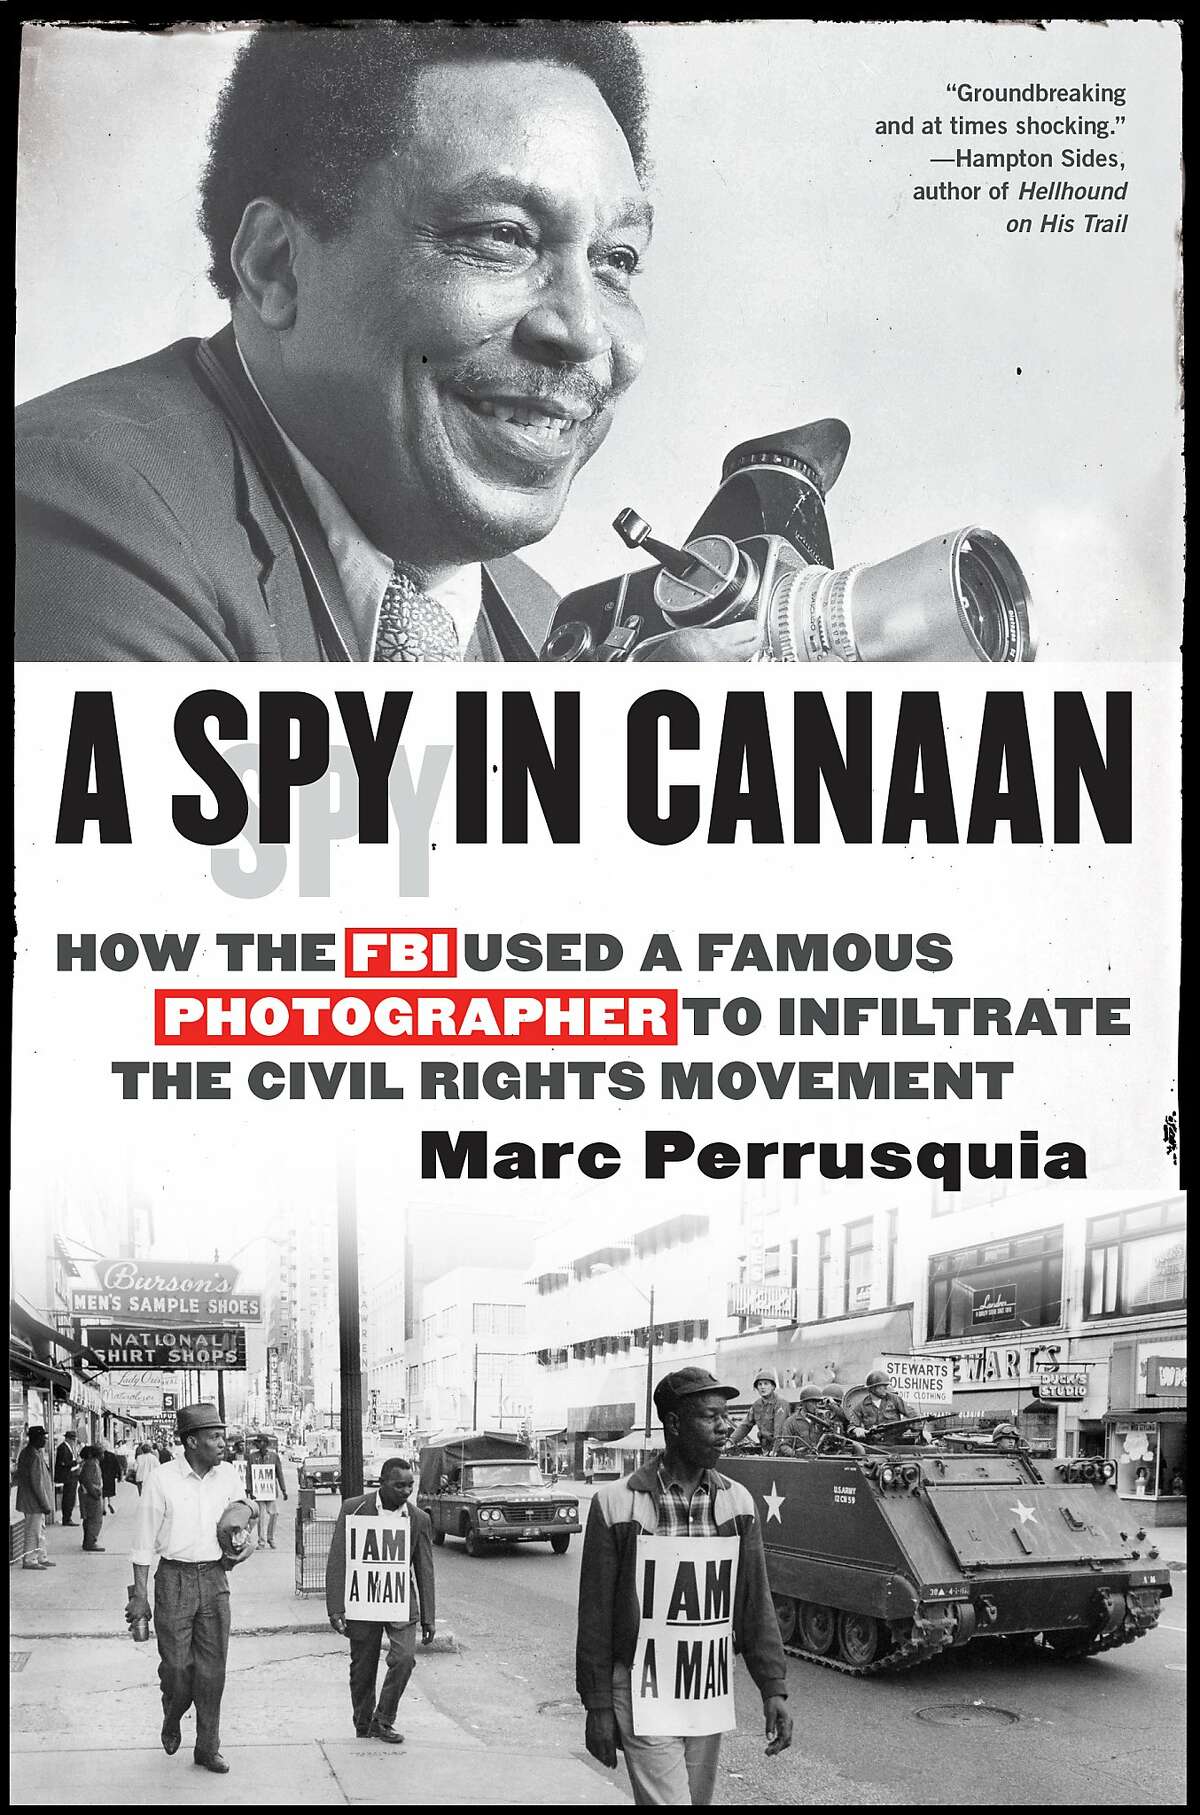 "A Spy in Canaan"